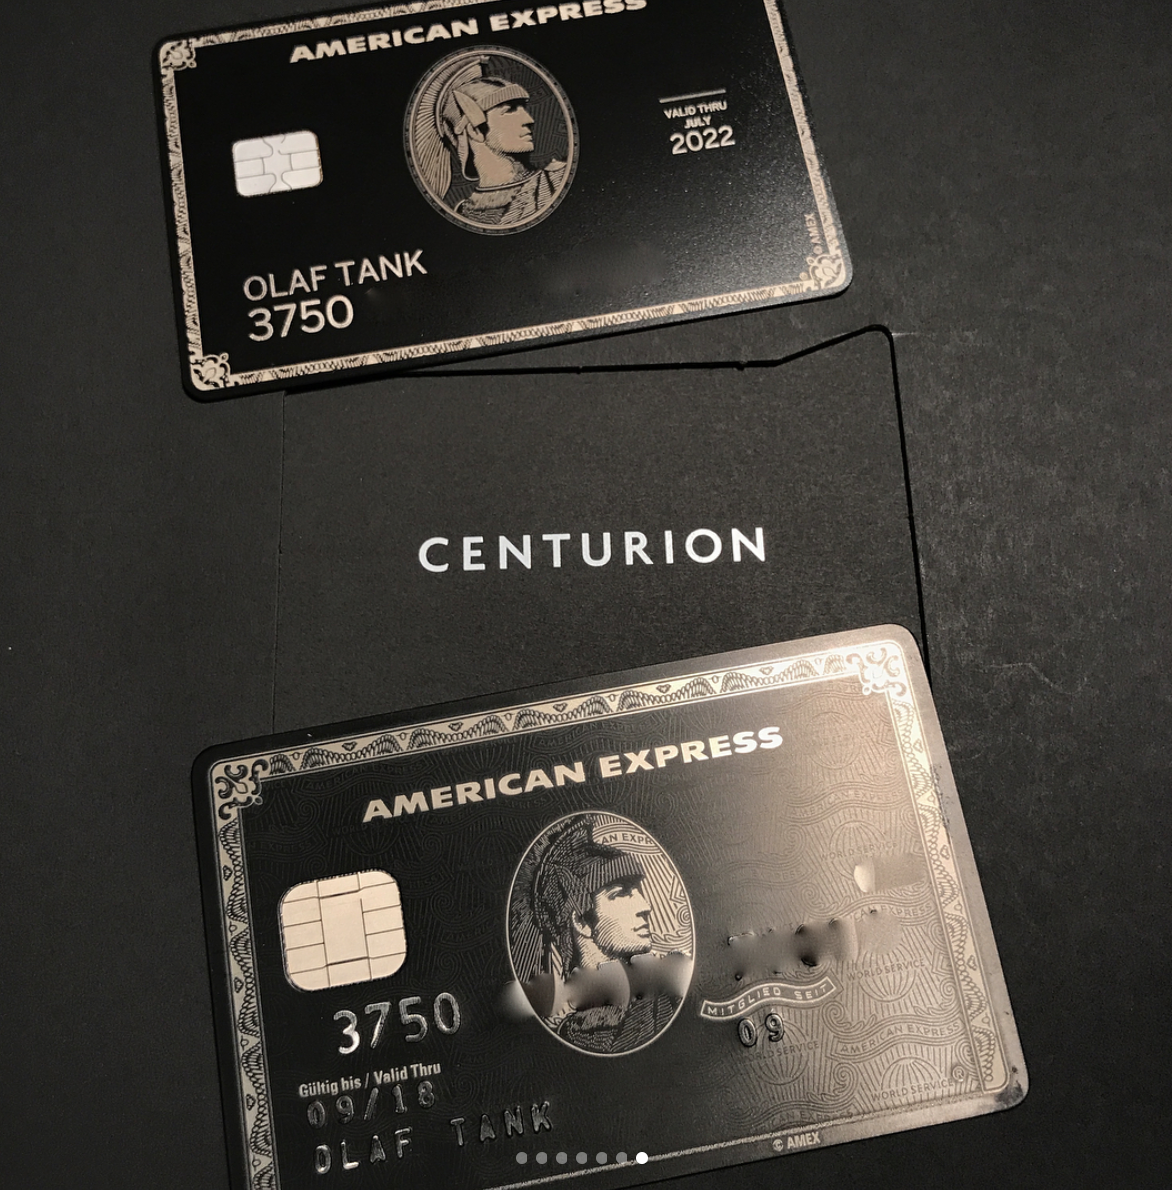 Customer paid with solid black front Centurion card. Real or fake? - FlyerTalk Forums